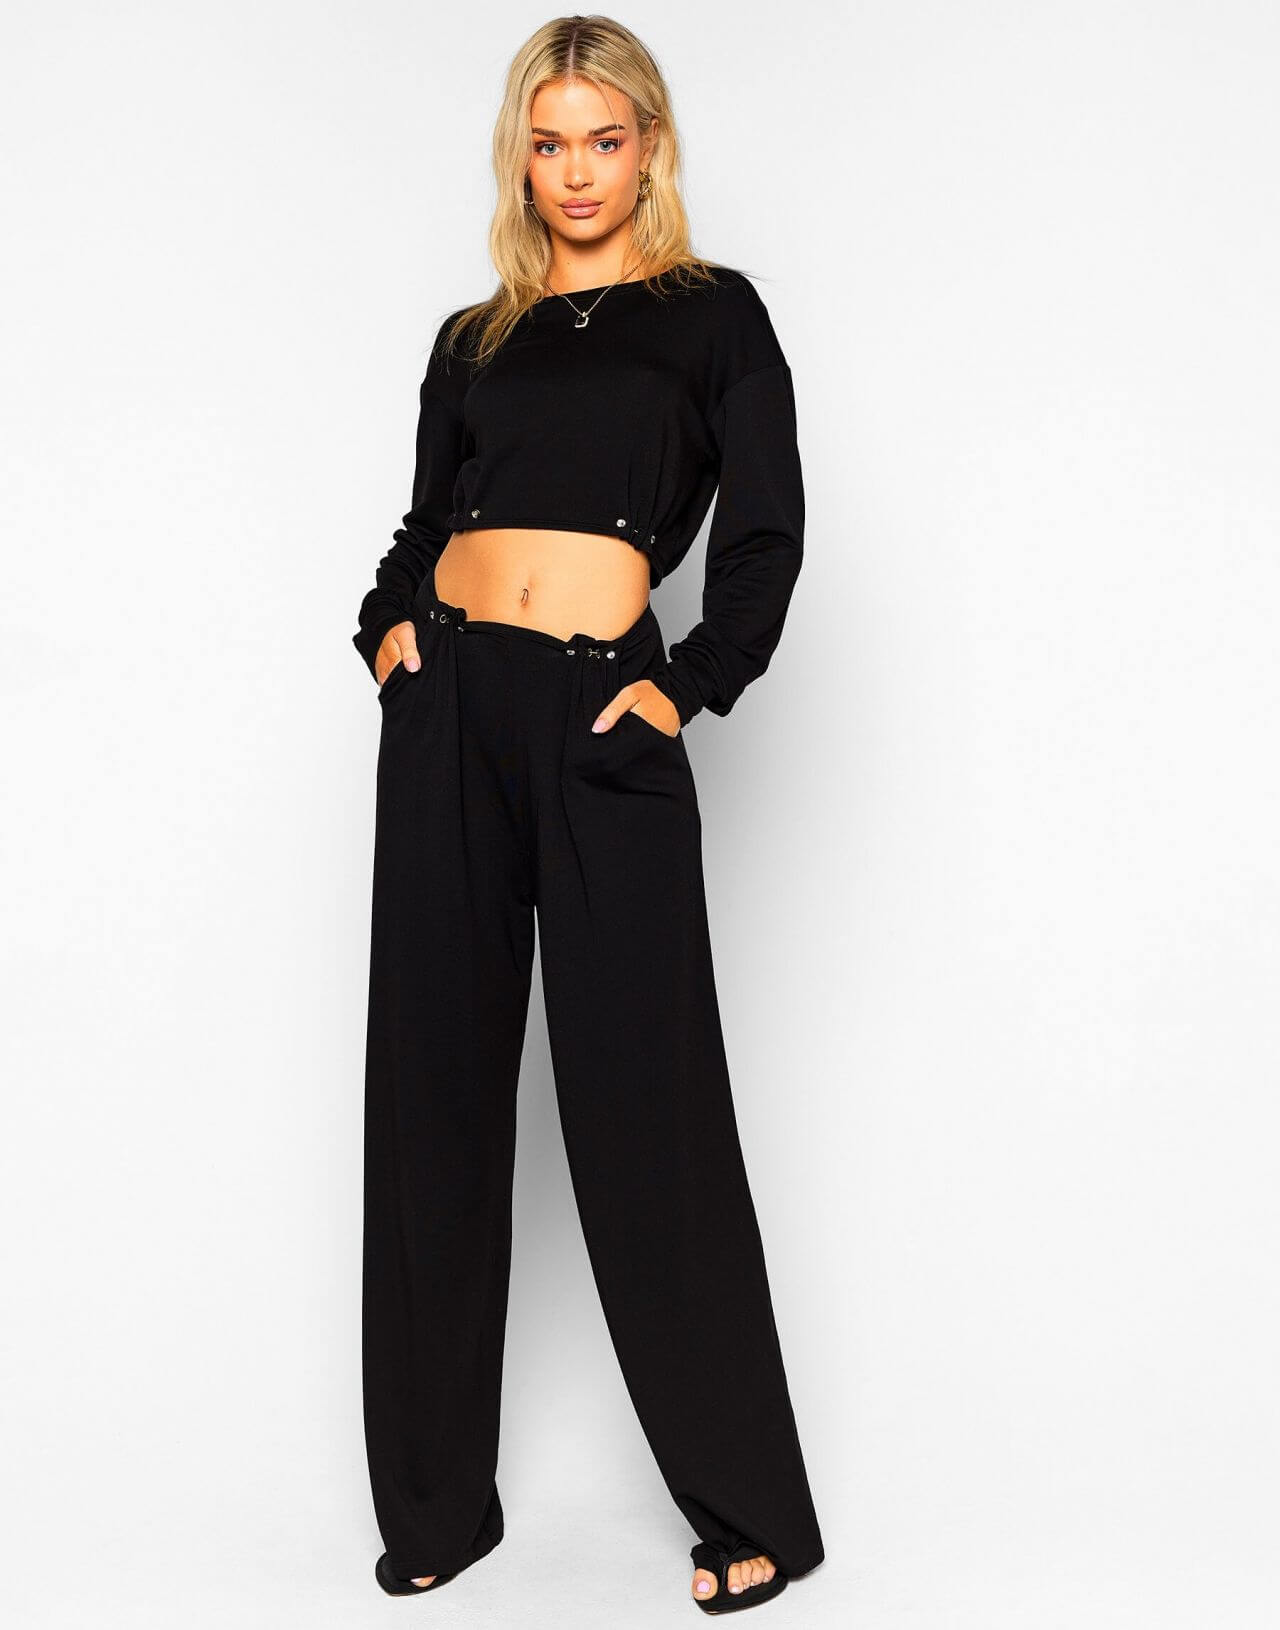 Carolina Marie Gorgeous Looks In Black Crop Top Flare Pants Outfits